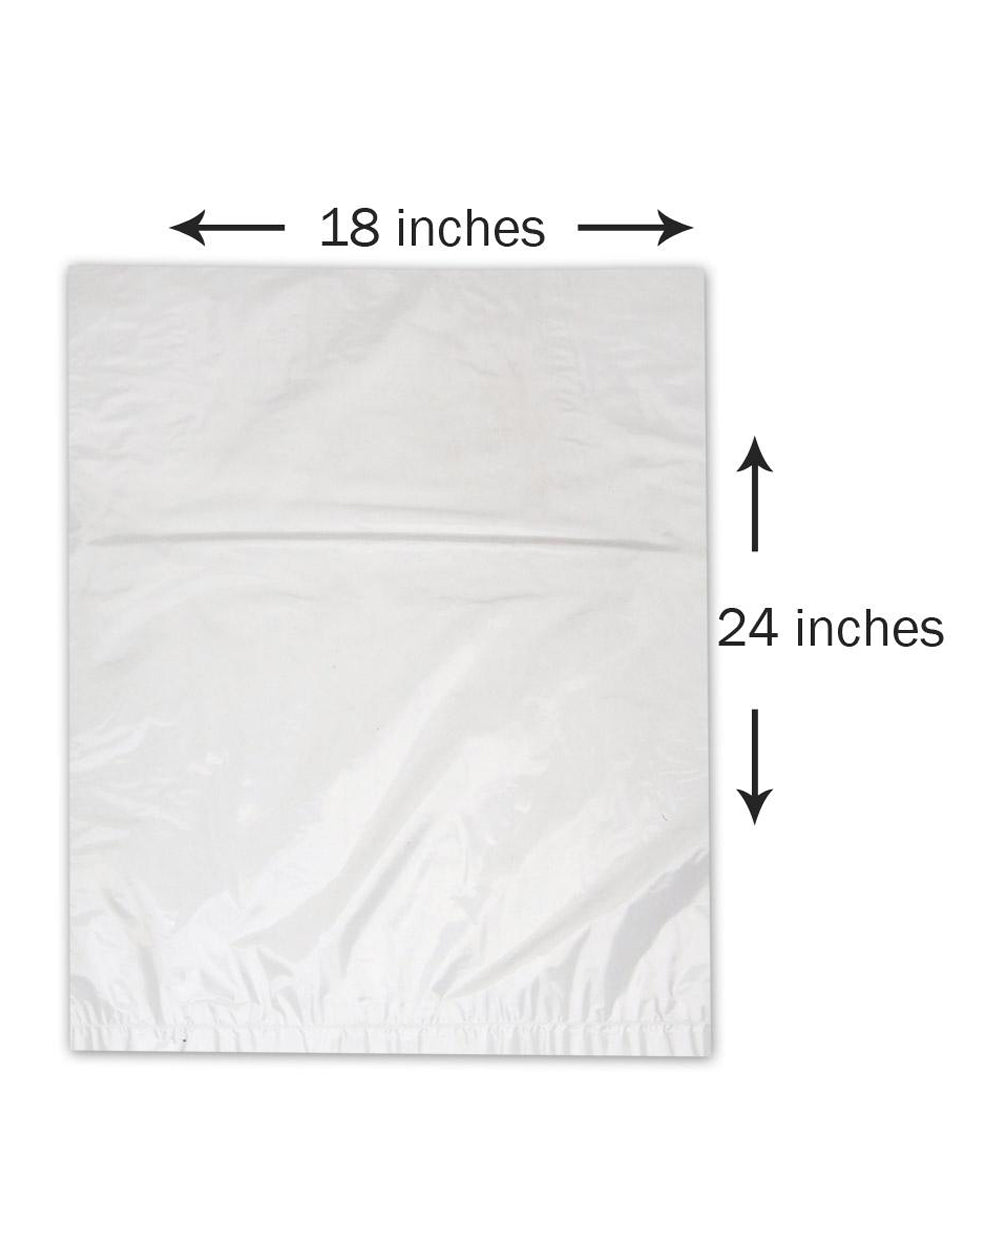 Turkey Oven Bags | 24in x 18in - Clear - 100 Count - 5